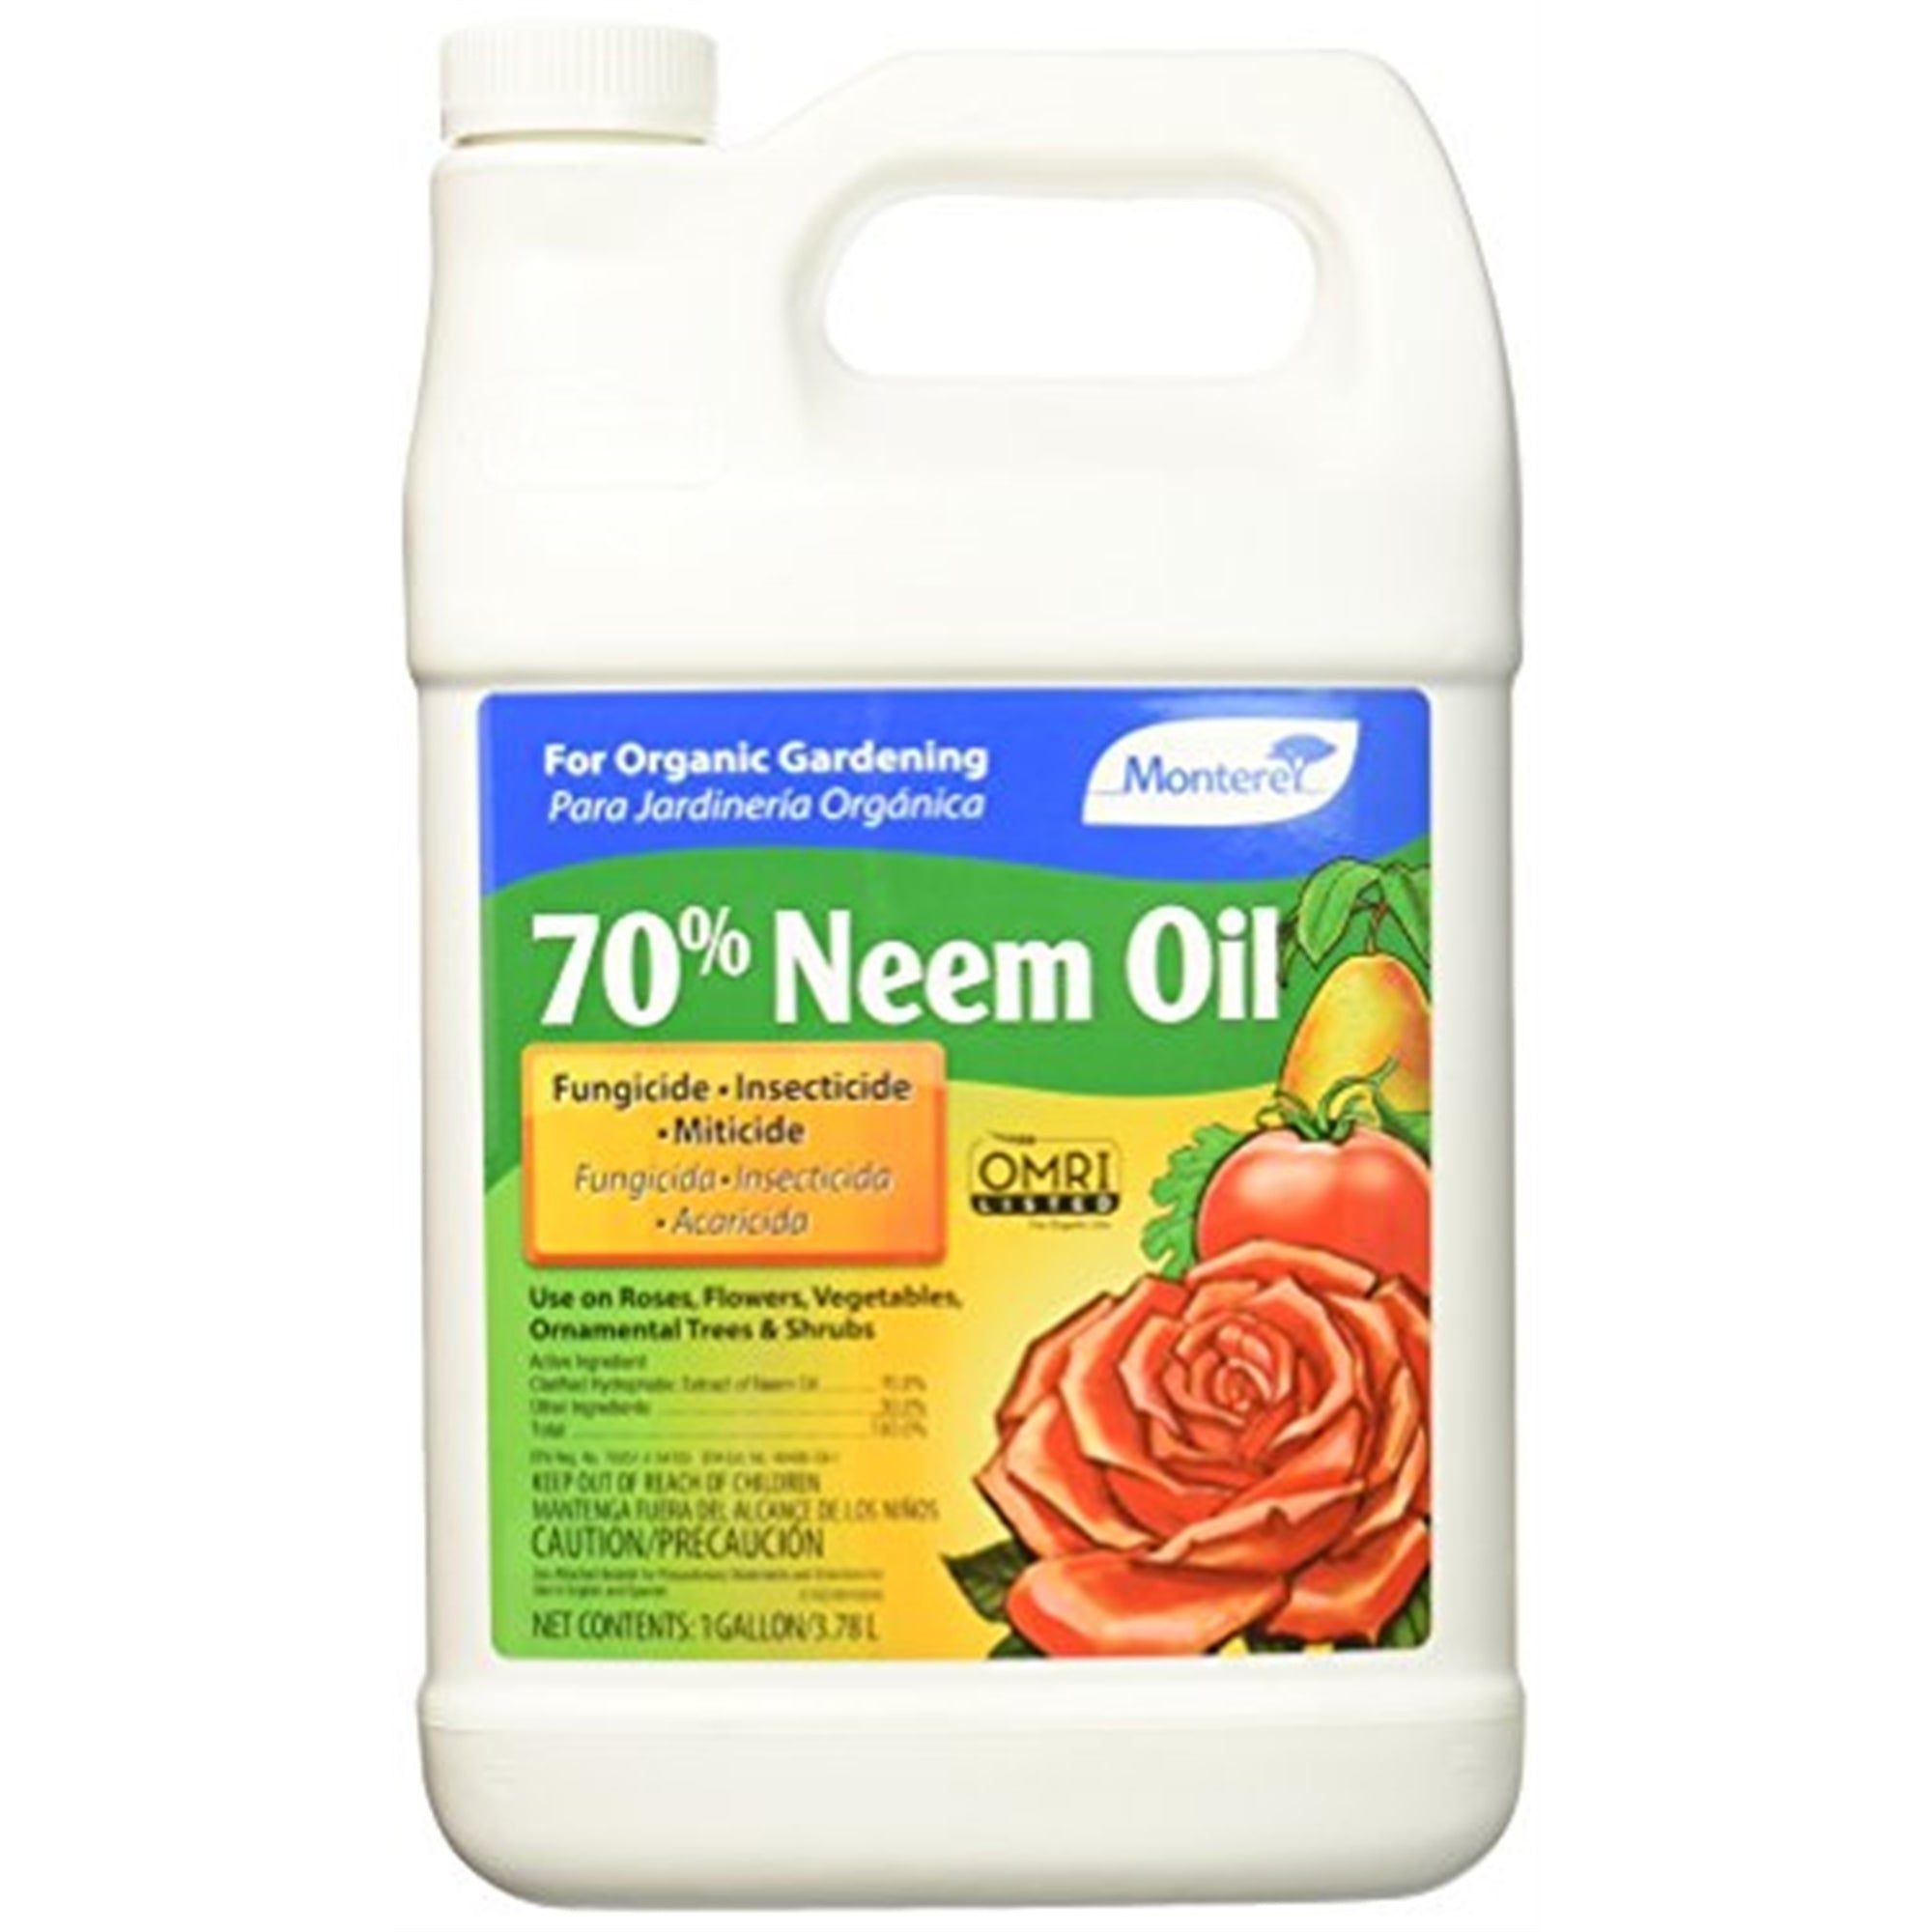 Monterey 70% Neem Oil Fungicide Insecticide Miticide Concentrate Organic, 1 Gal